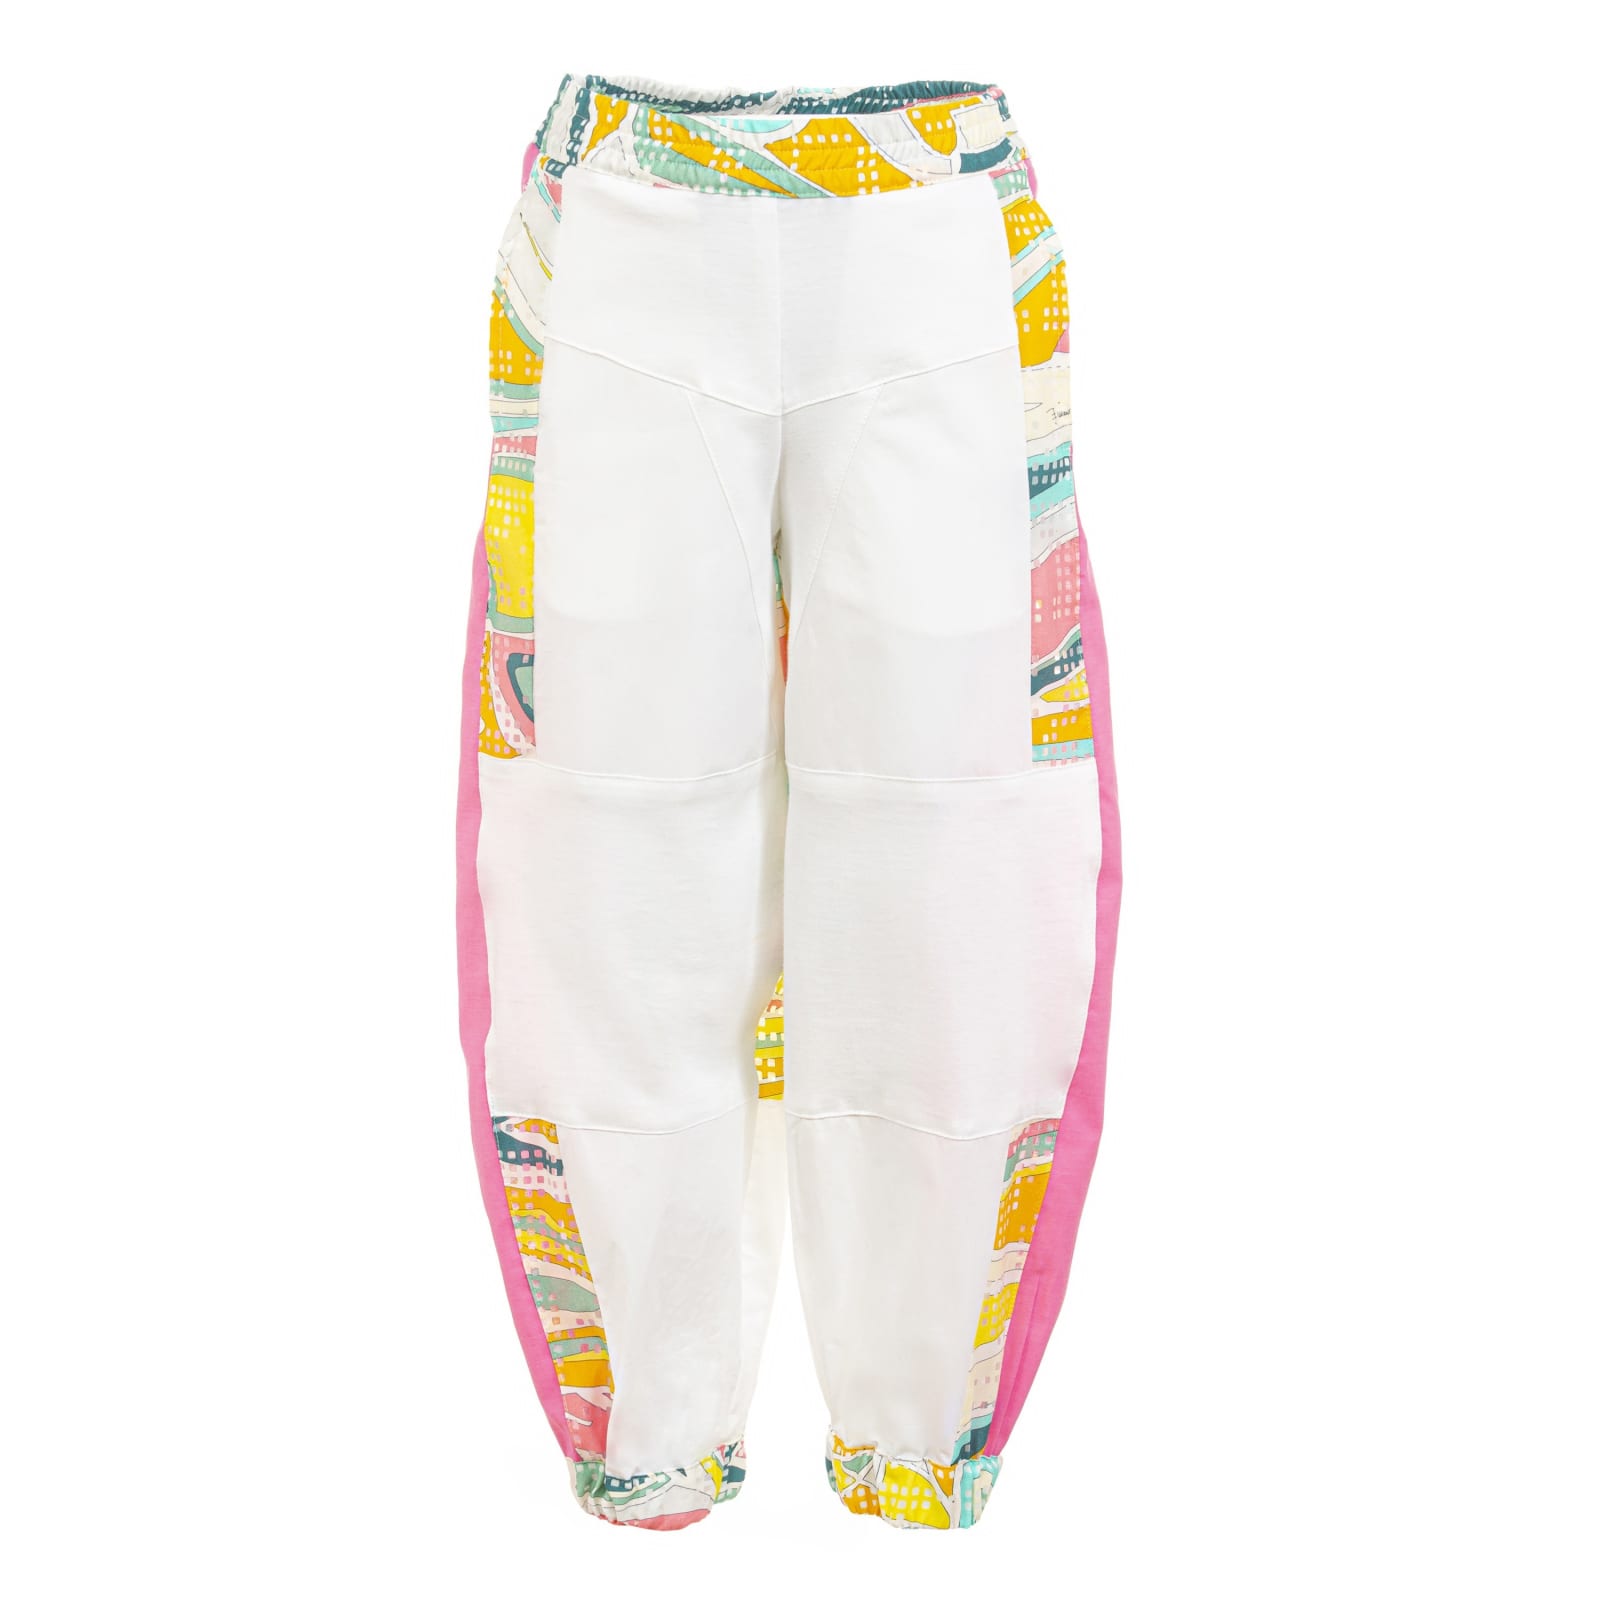 Emilio Pucci Patterned Trousers